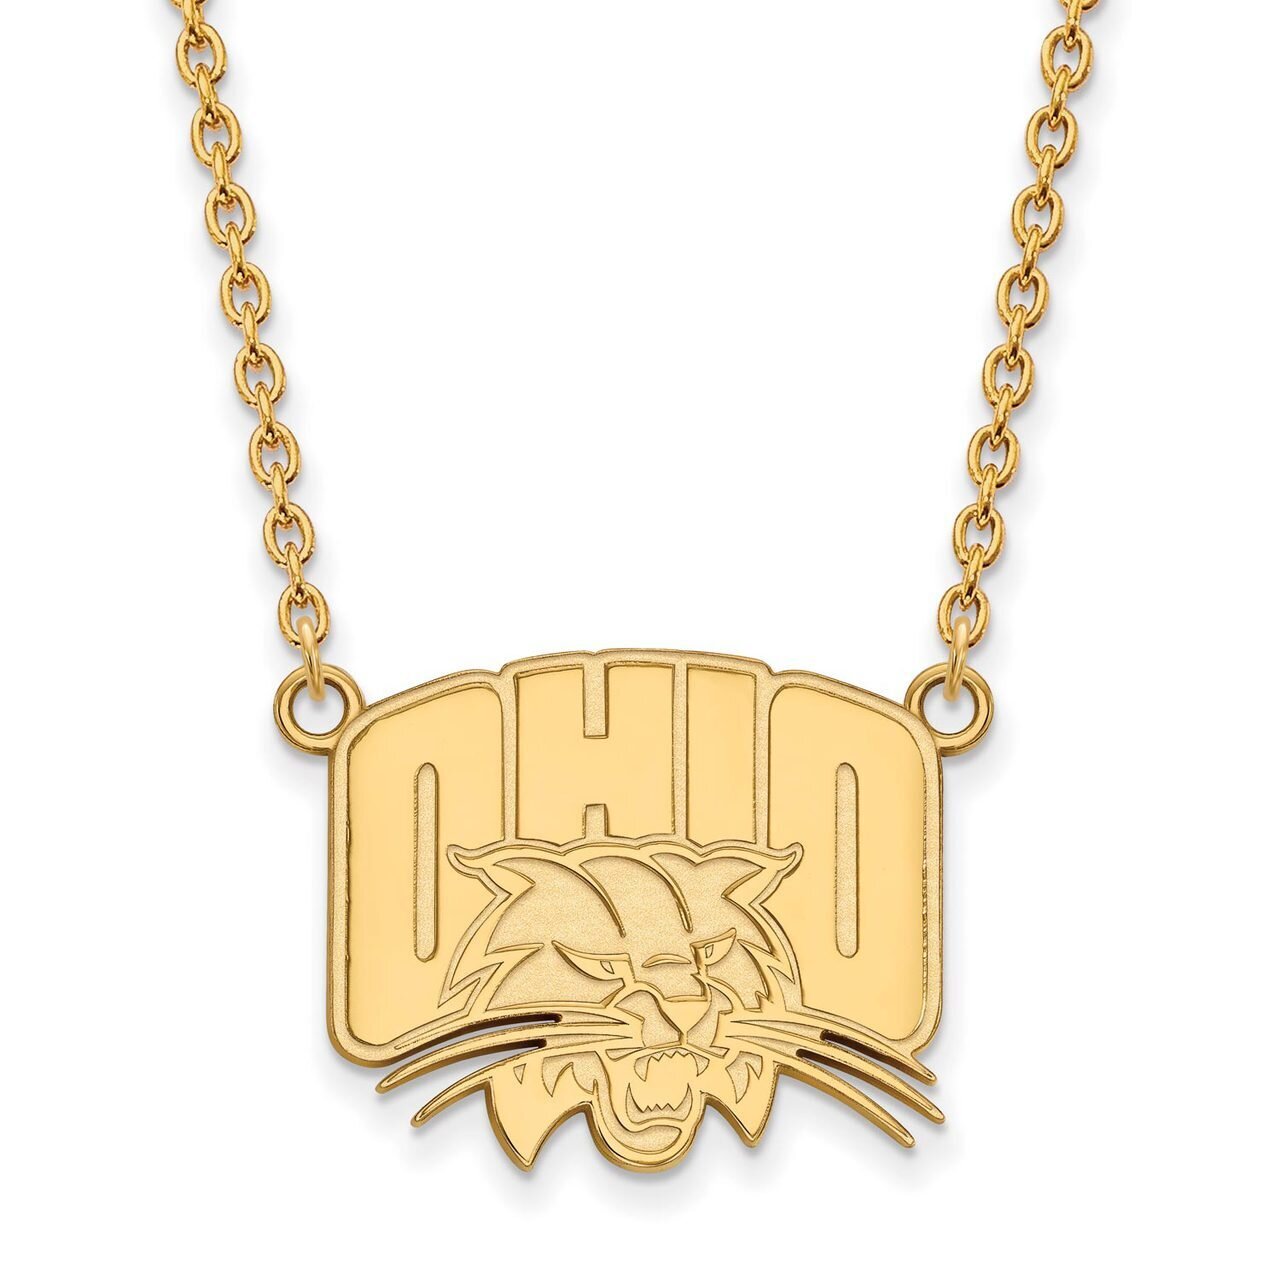 Ohio University Large Pendant with Chain Necklace Gold-plated Silver GP012OU-18